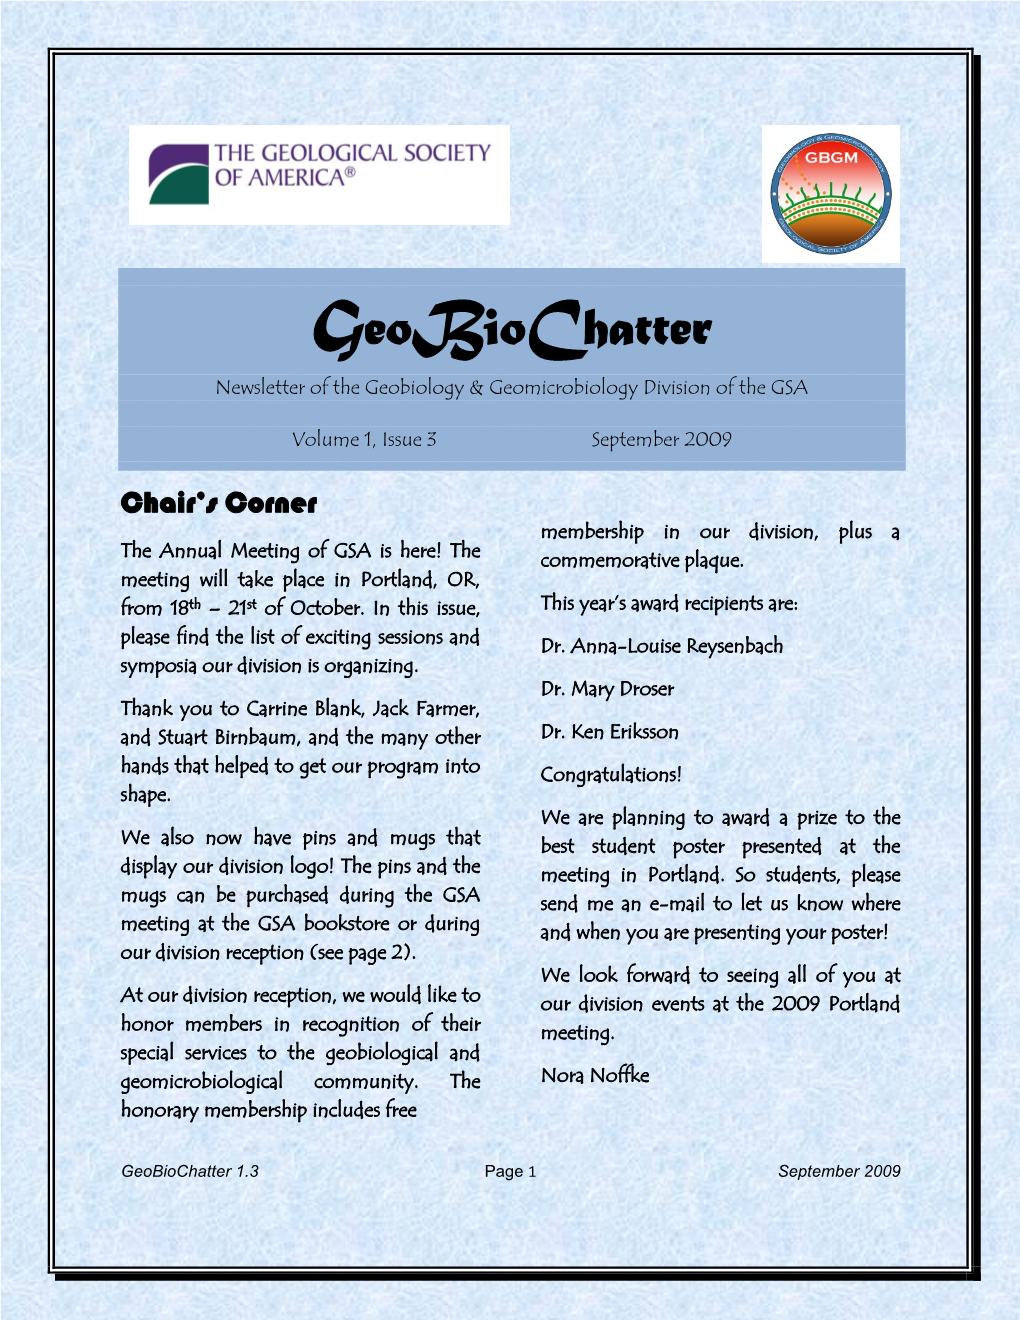 Geobiochatter Newsletter of the Geobiology & Geomicrobiology Division of the GSA